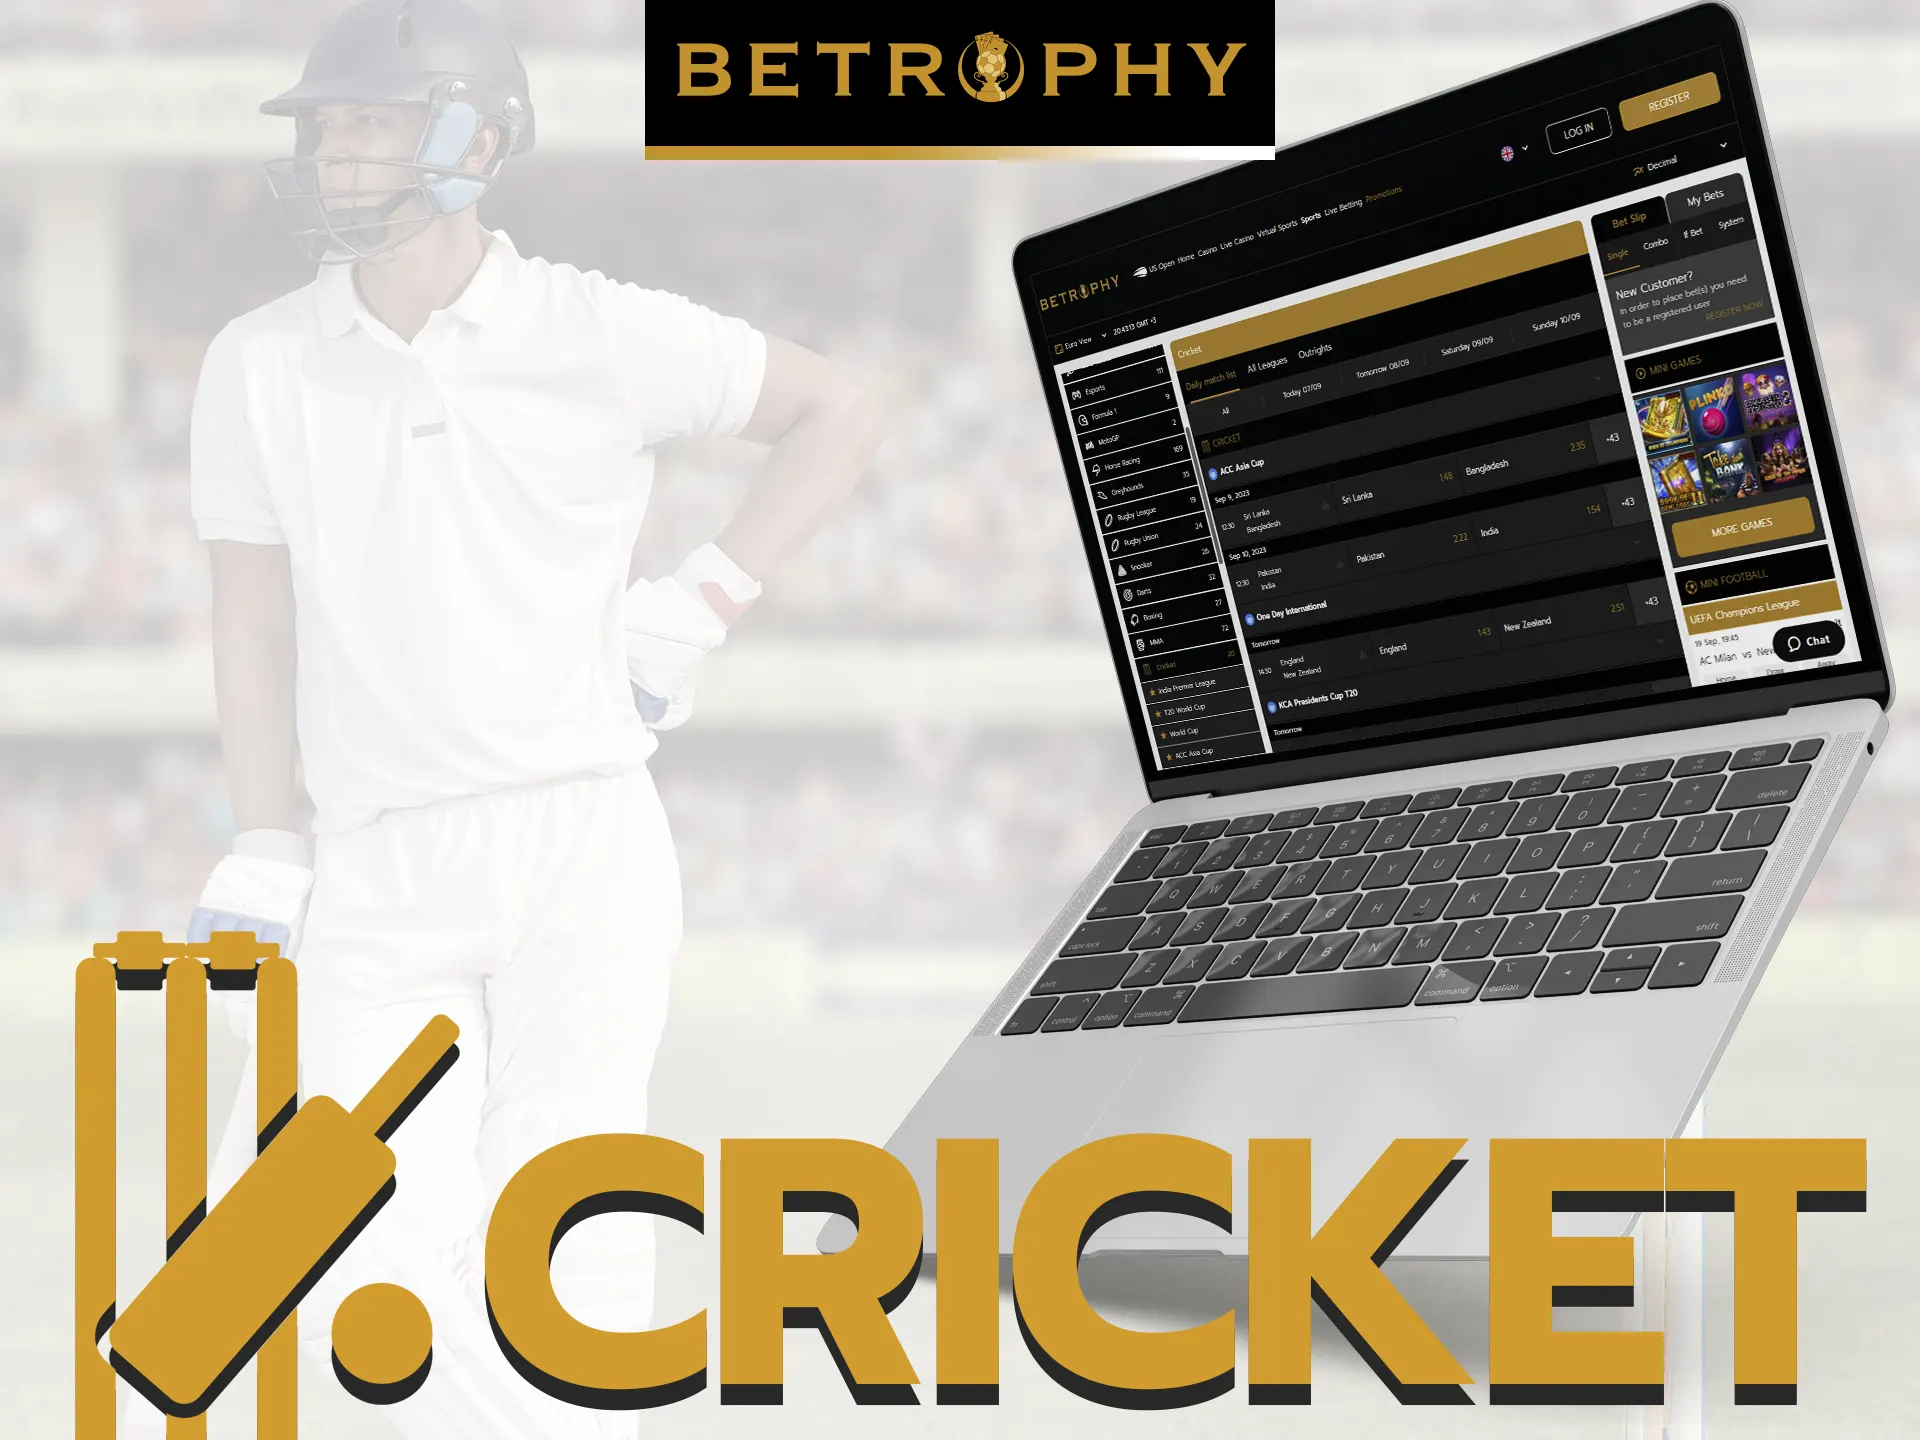 Bet on cricket with Betrophy.